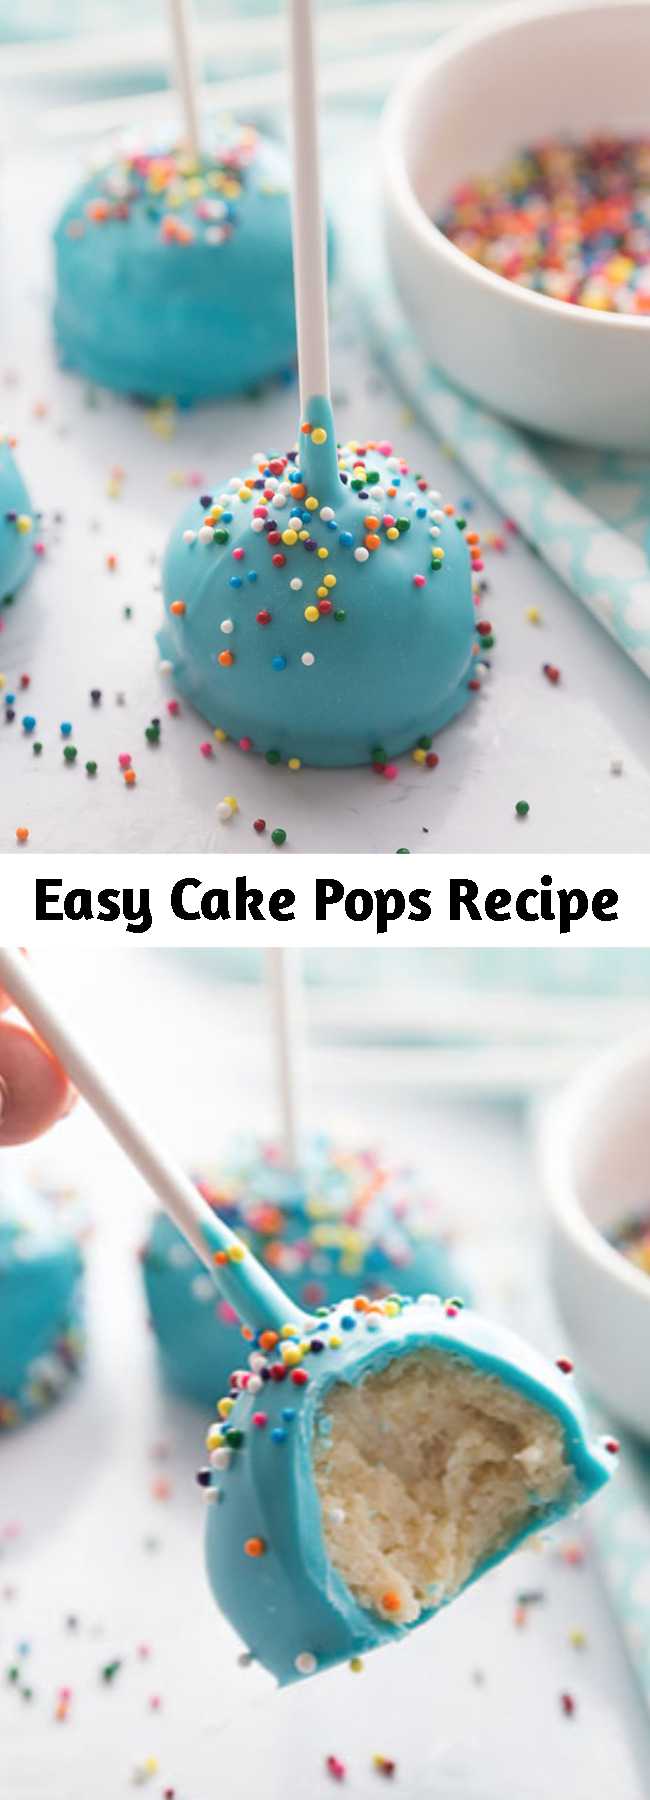 Easy Cake Pops Recipe - How to Make Cake Pops - such a fun and easy treat to make with kids! Perfect to make for birthday parties too! #recipes #kidsrecipes #snacks #treats #bestideasforkids